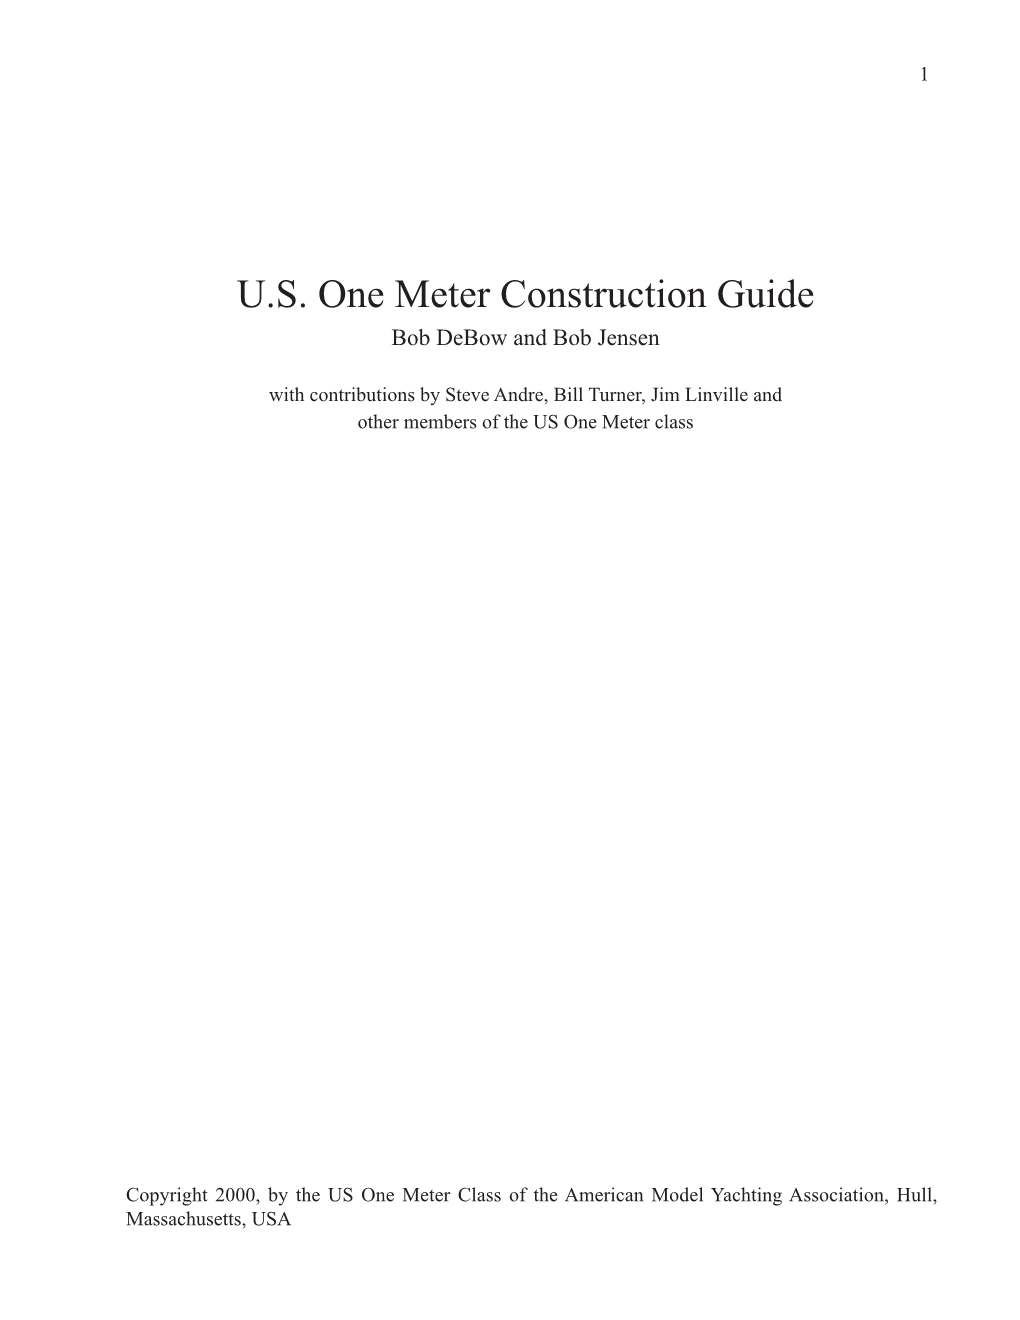 US One Meter Construction Guide Is a Necessary Reference